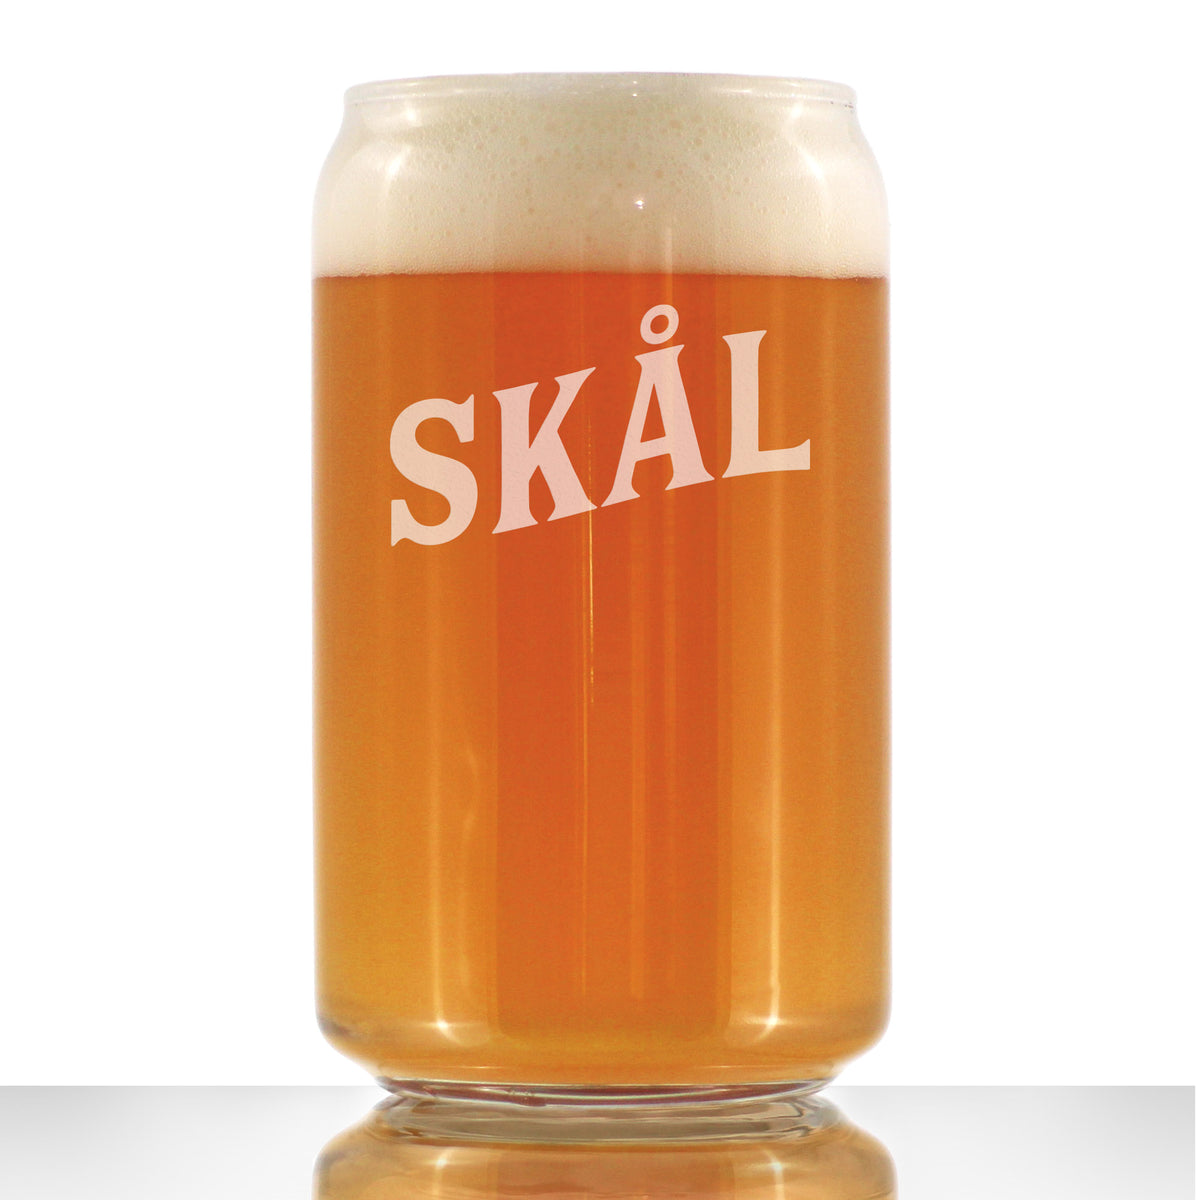 Skal - Norwegian Cheers - Beer Can Pint Glass - Cute Sweden and Norway Themed Gifts or Party Decor for Women - 16 Oz